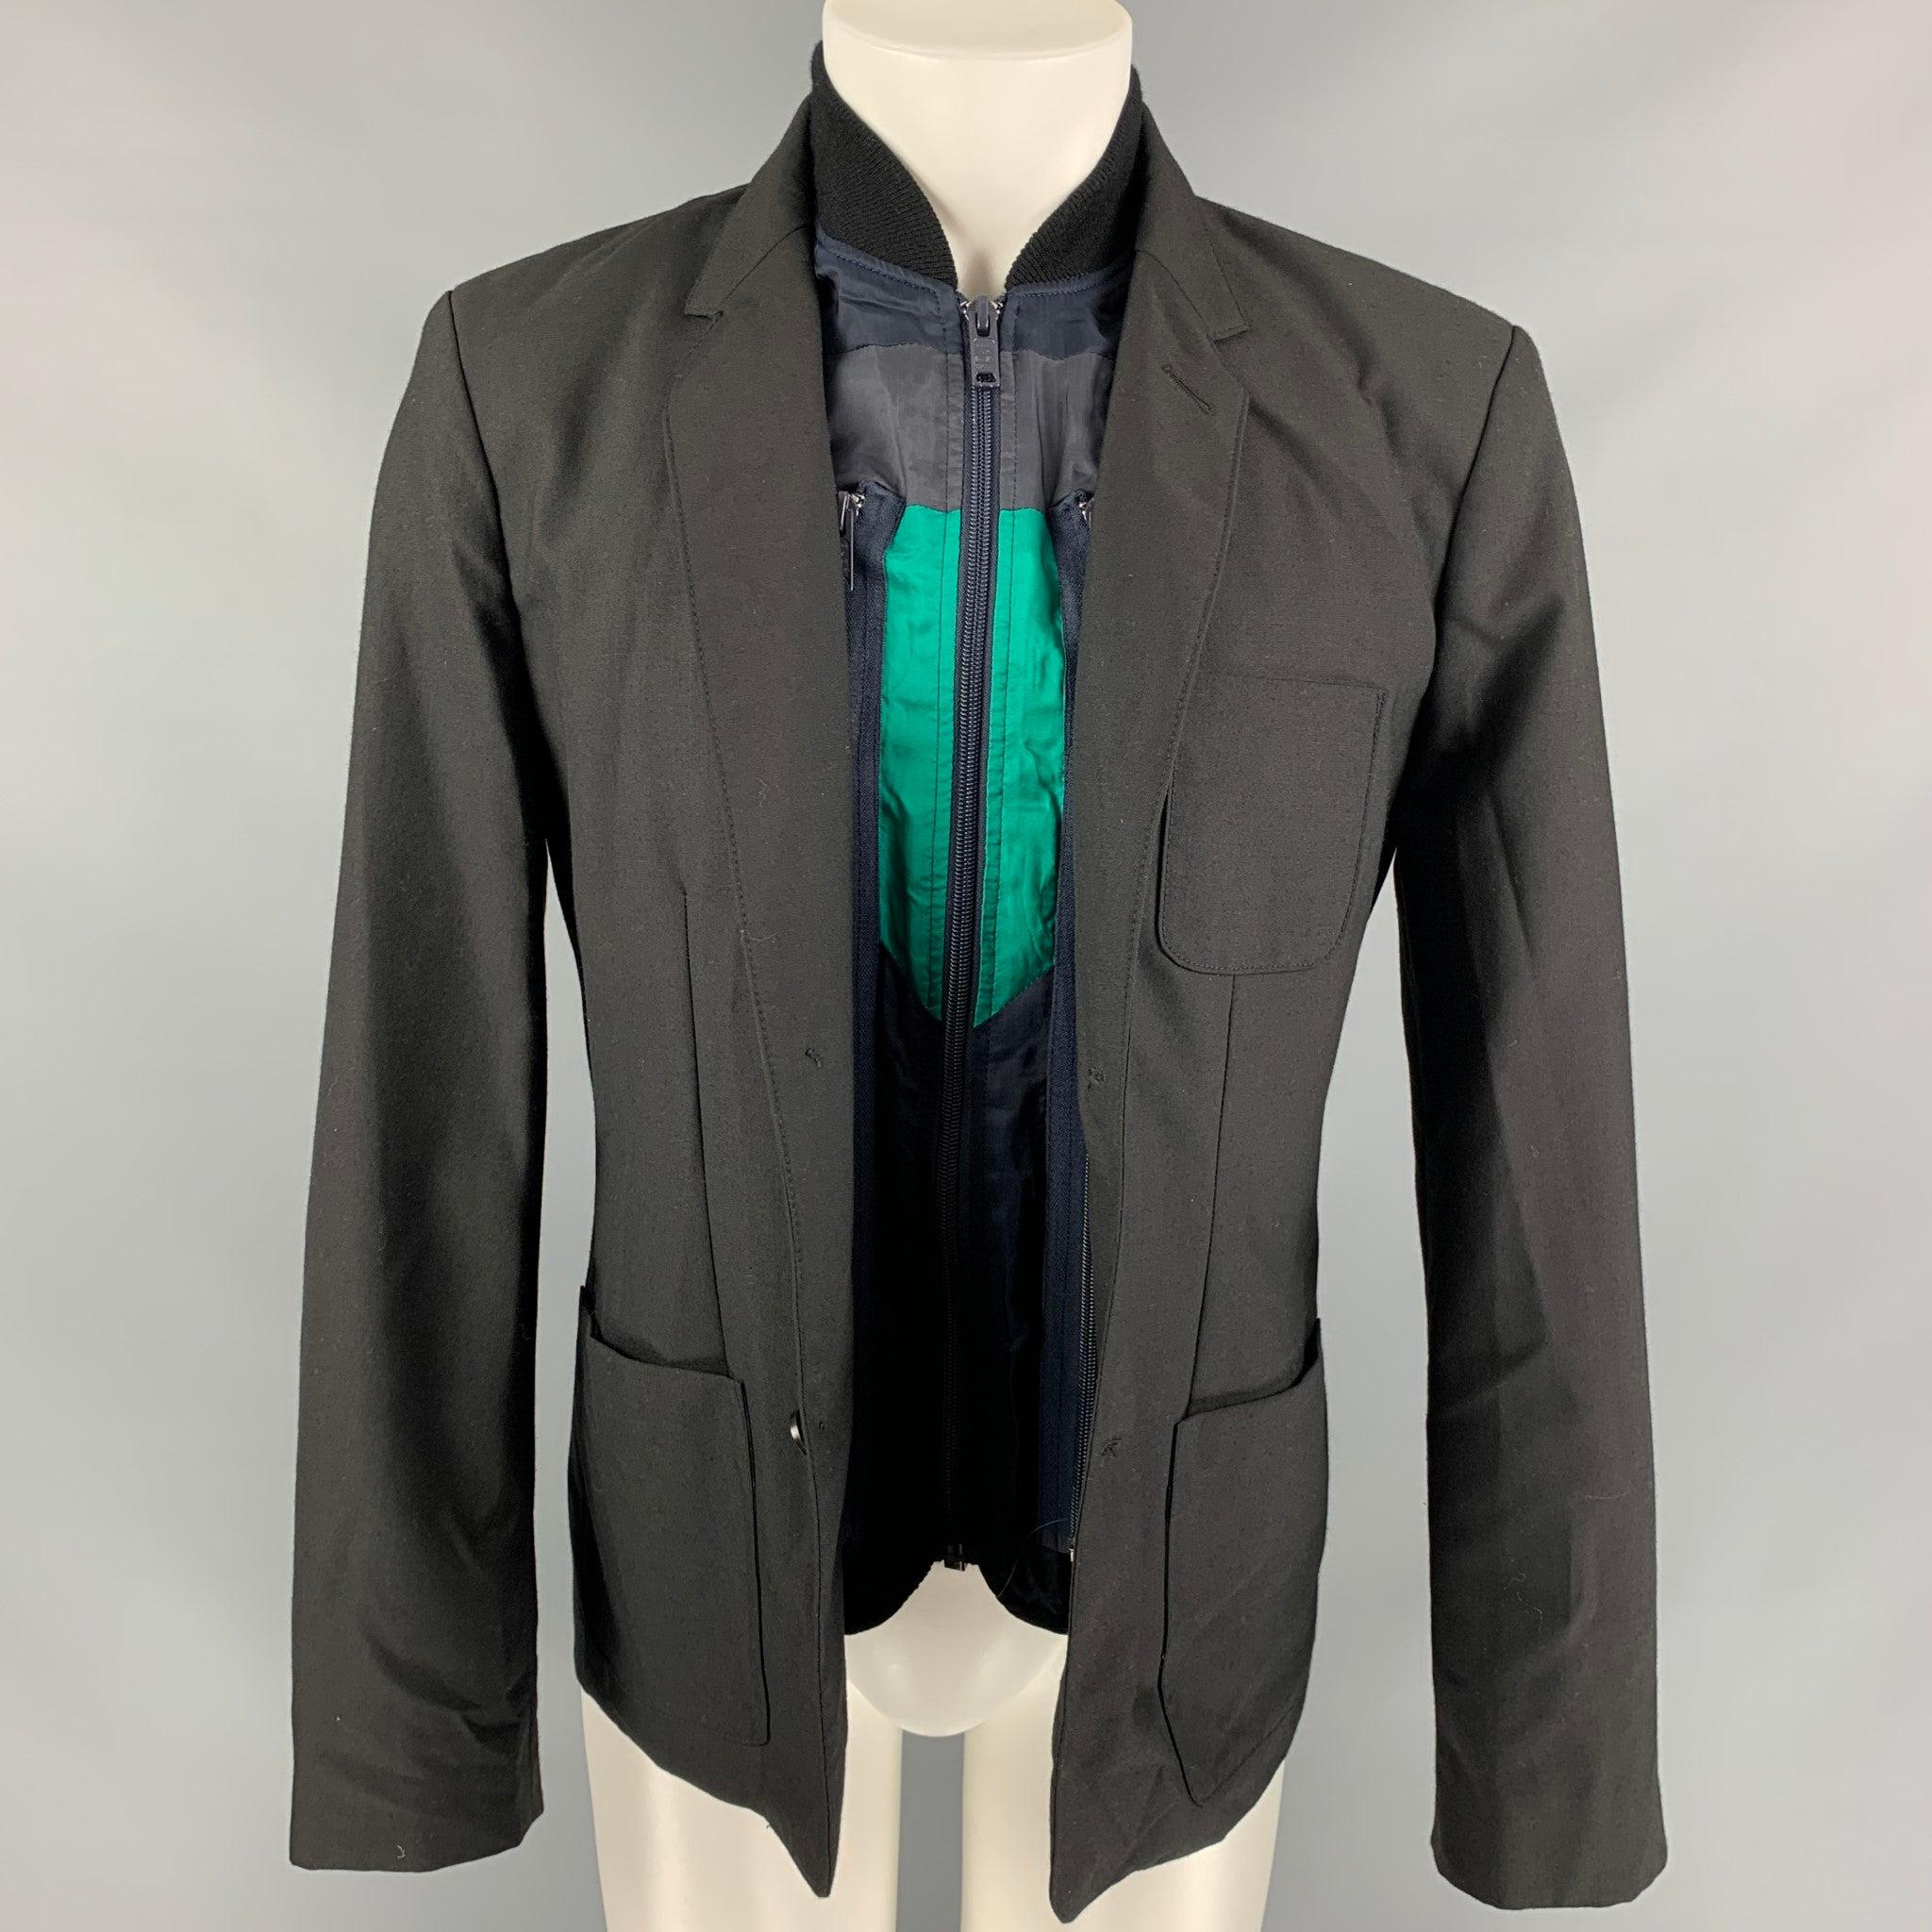 MARC by MARC JACOBS jacket comes in a black & navy polyester blend featuring a removable vest design, patch pockets, notch lapel, and a three button closure.
Very Good
Pre-Owned Condition.  

Marked:   L 

Measurements: 
 
Shoulder: 18 inches 